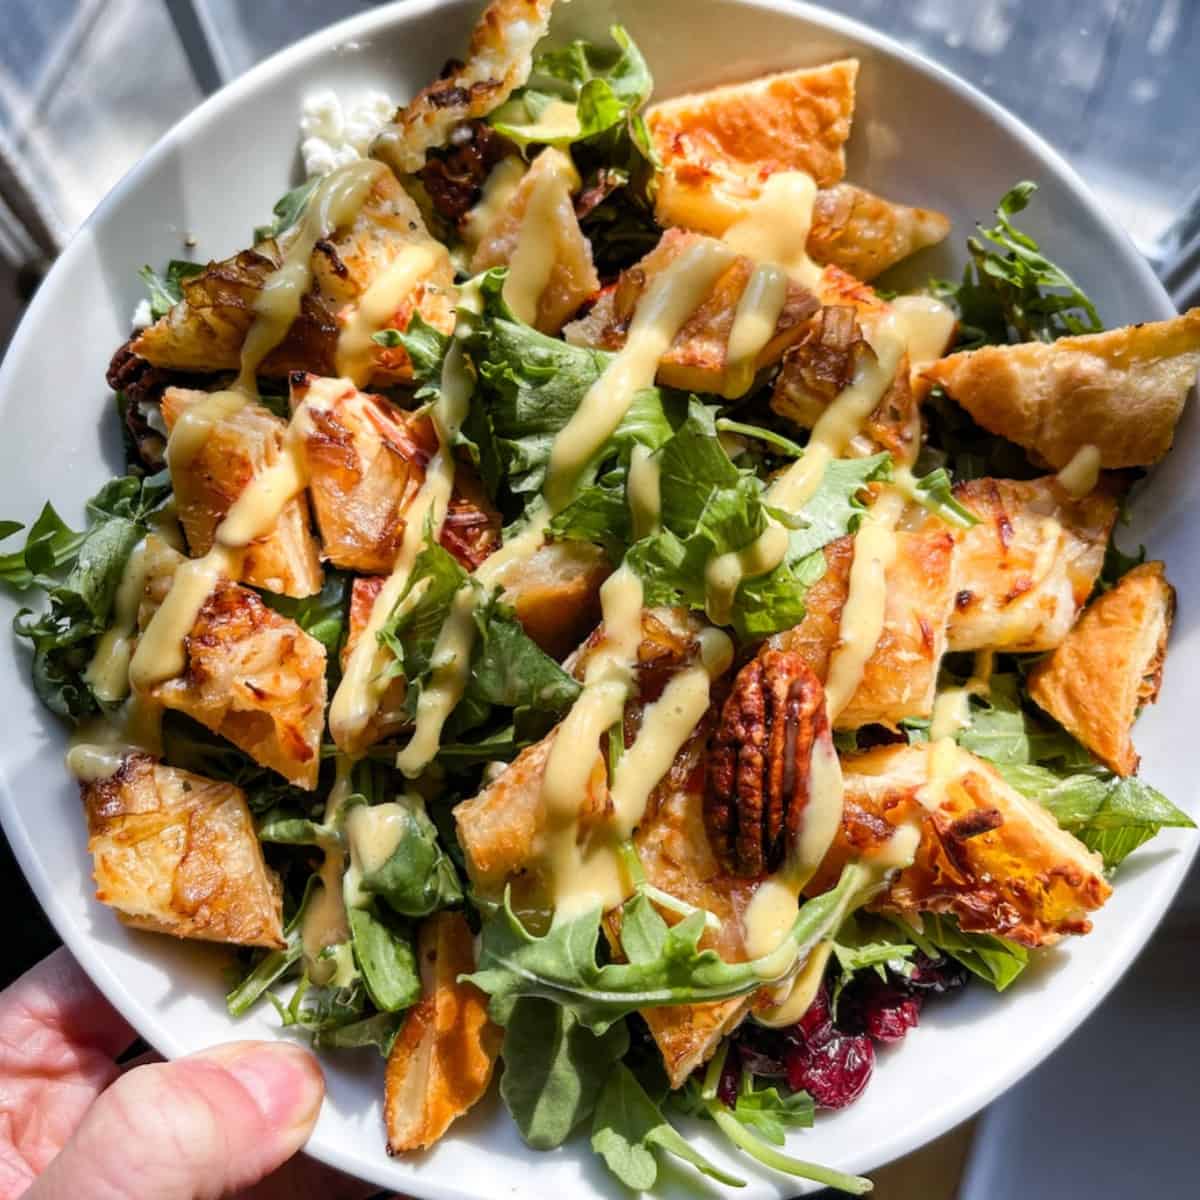 Honey Mustard Salad With Pizza Croutons